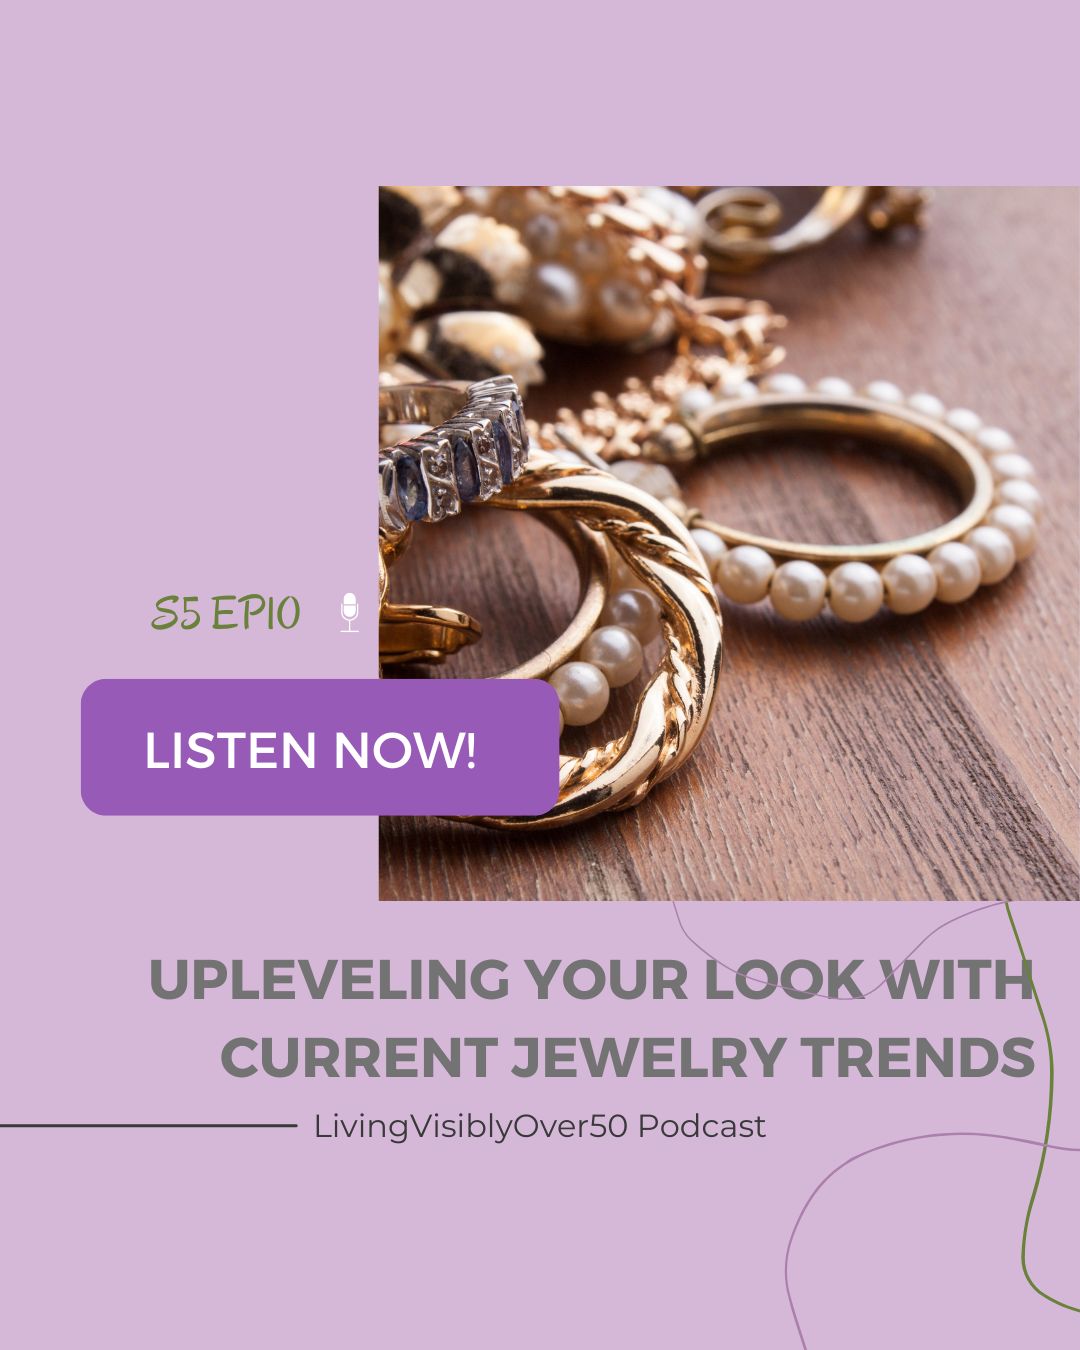 Jewelry trends living visibly over 50 podcast